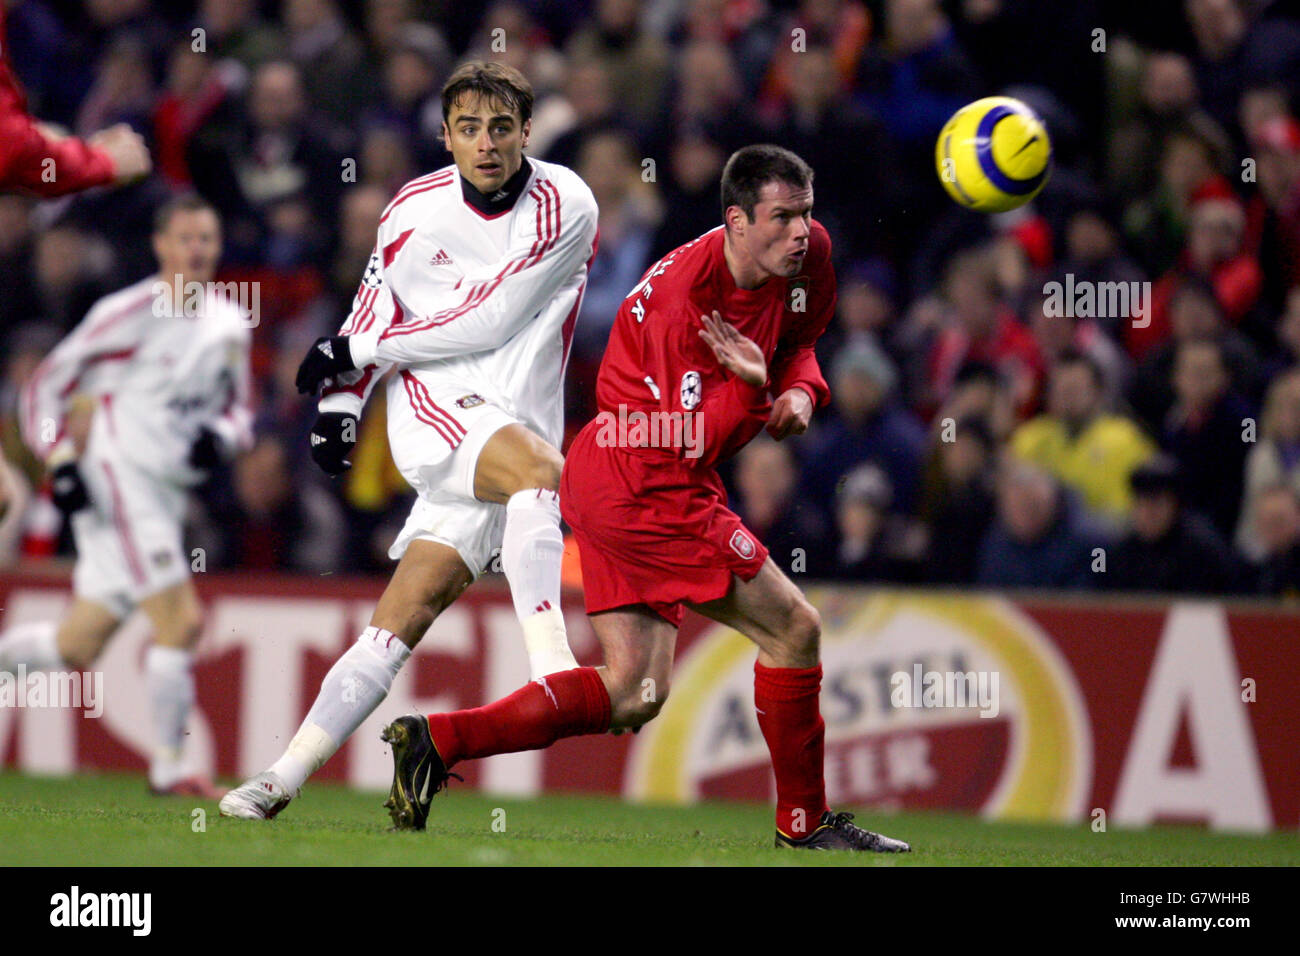 Soccer - UEFA Champions League - Round of 16 - First Leg - Liverpool v Bayer Leverkusen - Anfield. Liverpool's Jaime Carragher tries to stop Bayer Leverkusen's Dimitar Berbatov from taking a shot at goal Stock Photo